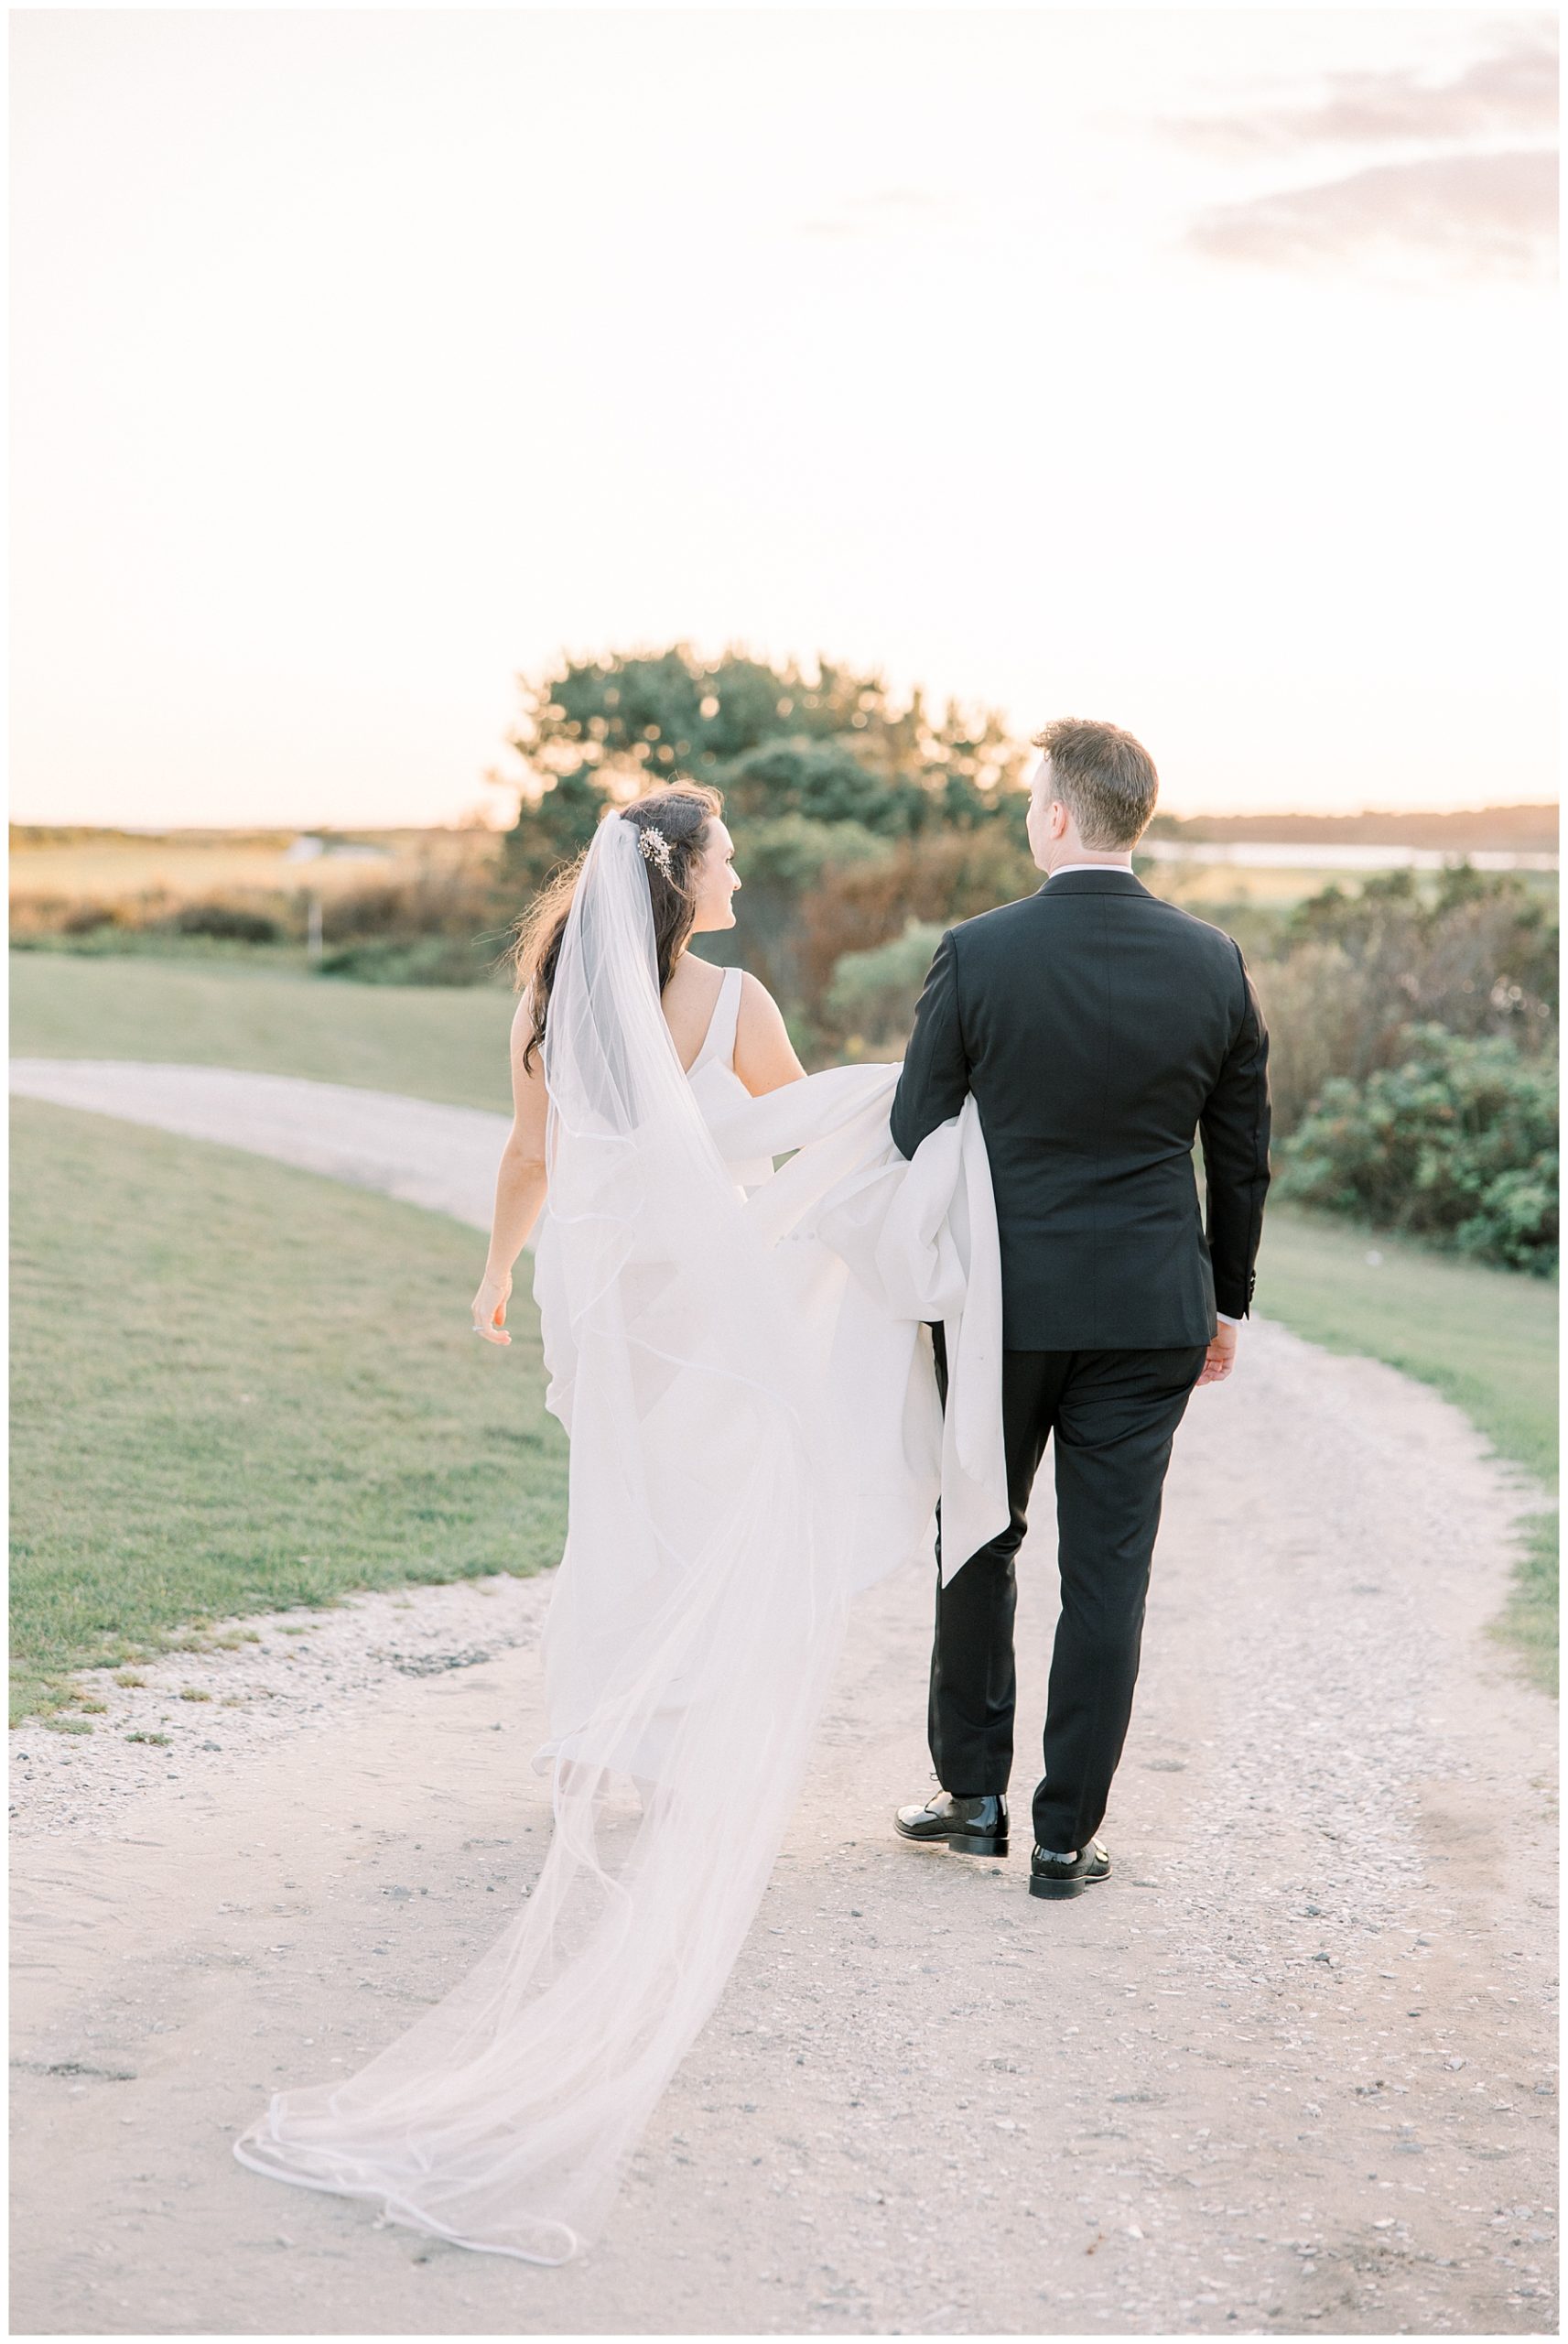 Best Cape Cod Wedding Venues photographed by Cape Cod Wedding Photographer Stephanie Berenson